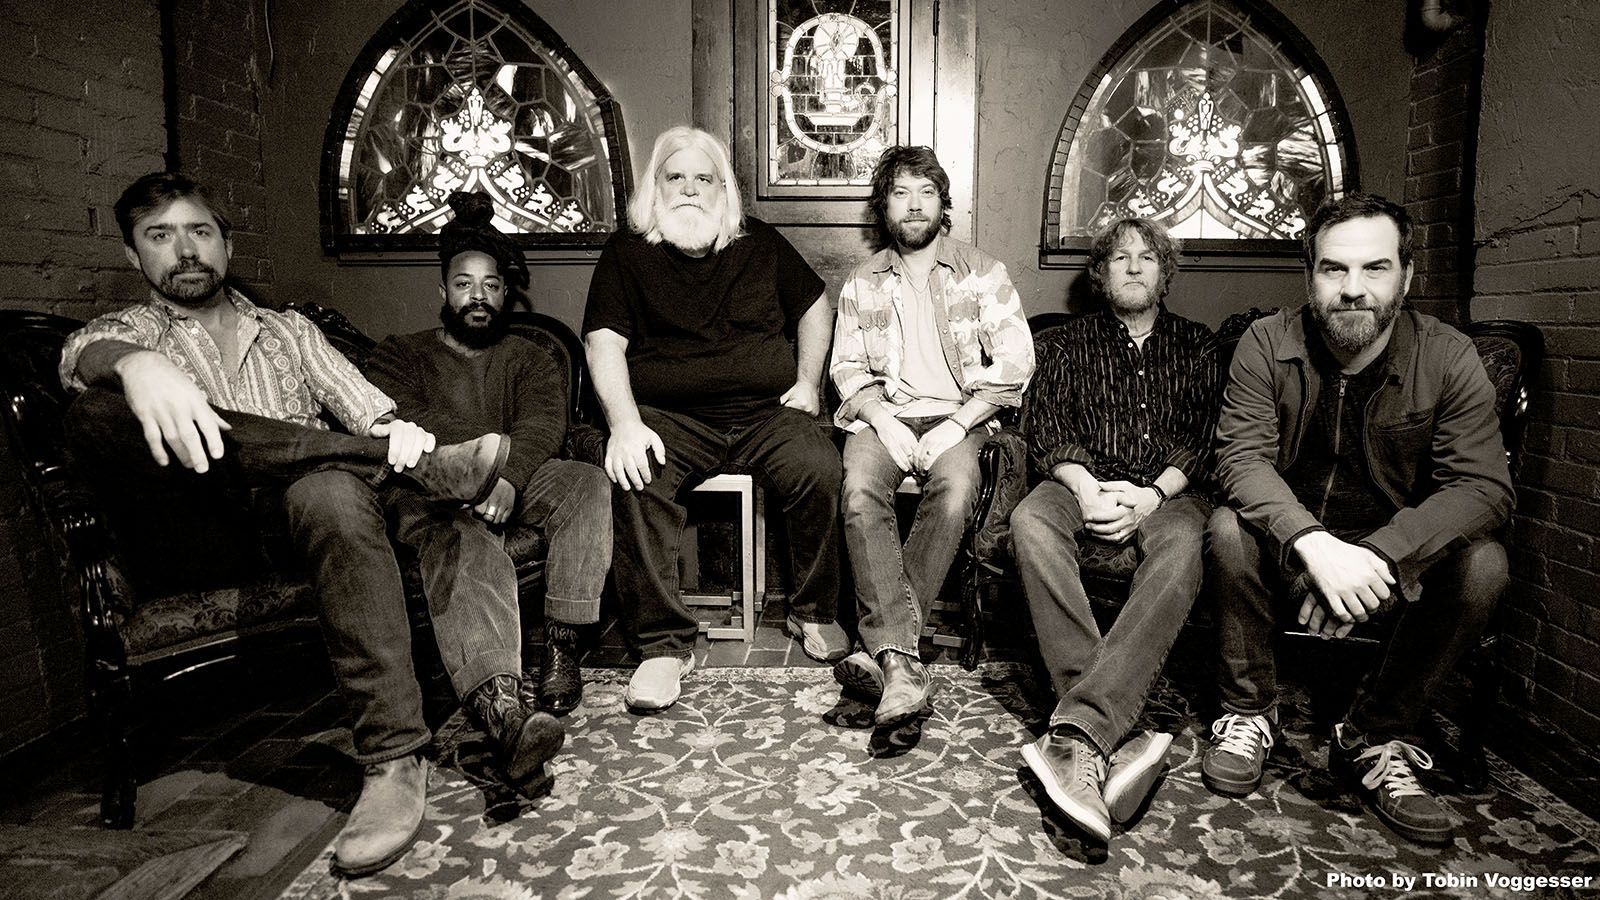 Leftover Salmon will be at Sweetwater Performance Pavilion on Saturday, June 1, with The Infamous Stringdusters.